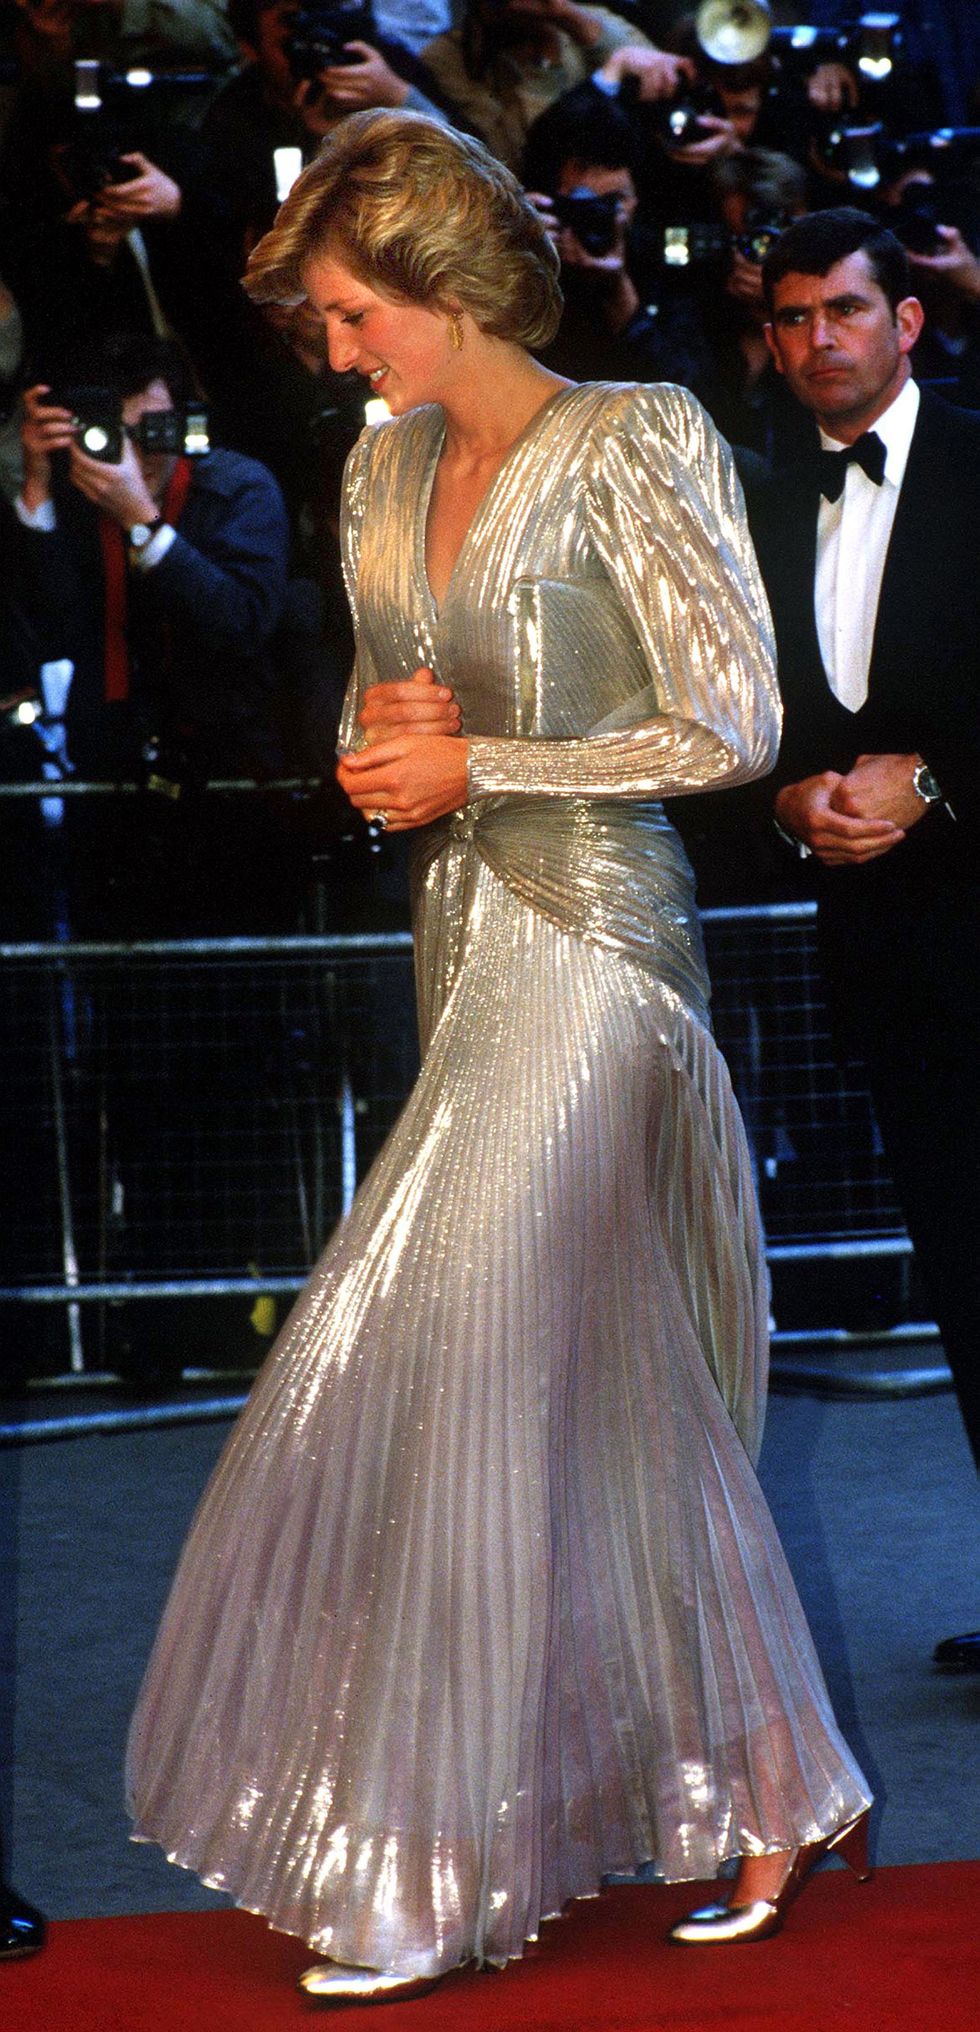 princess diana 1961   1997 arrives for the london premiere of the james bond film 'a view to a kill' at the empire, leicester square, july 1985 she is wearing a gold lame evening gown by bruce oldfield photo by jayne fincherprincess diana archivegetty images